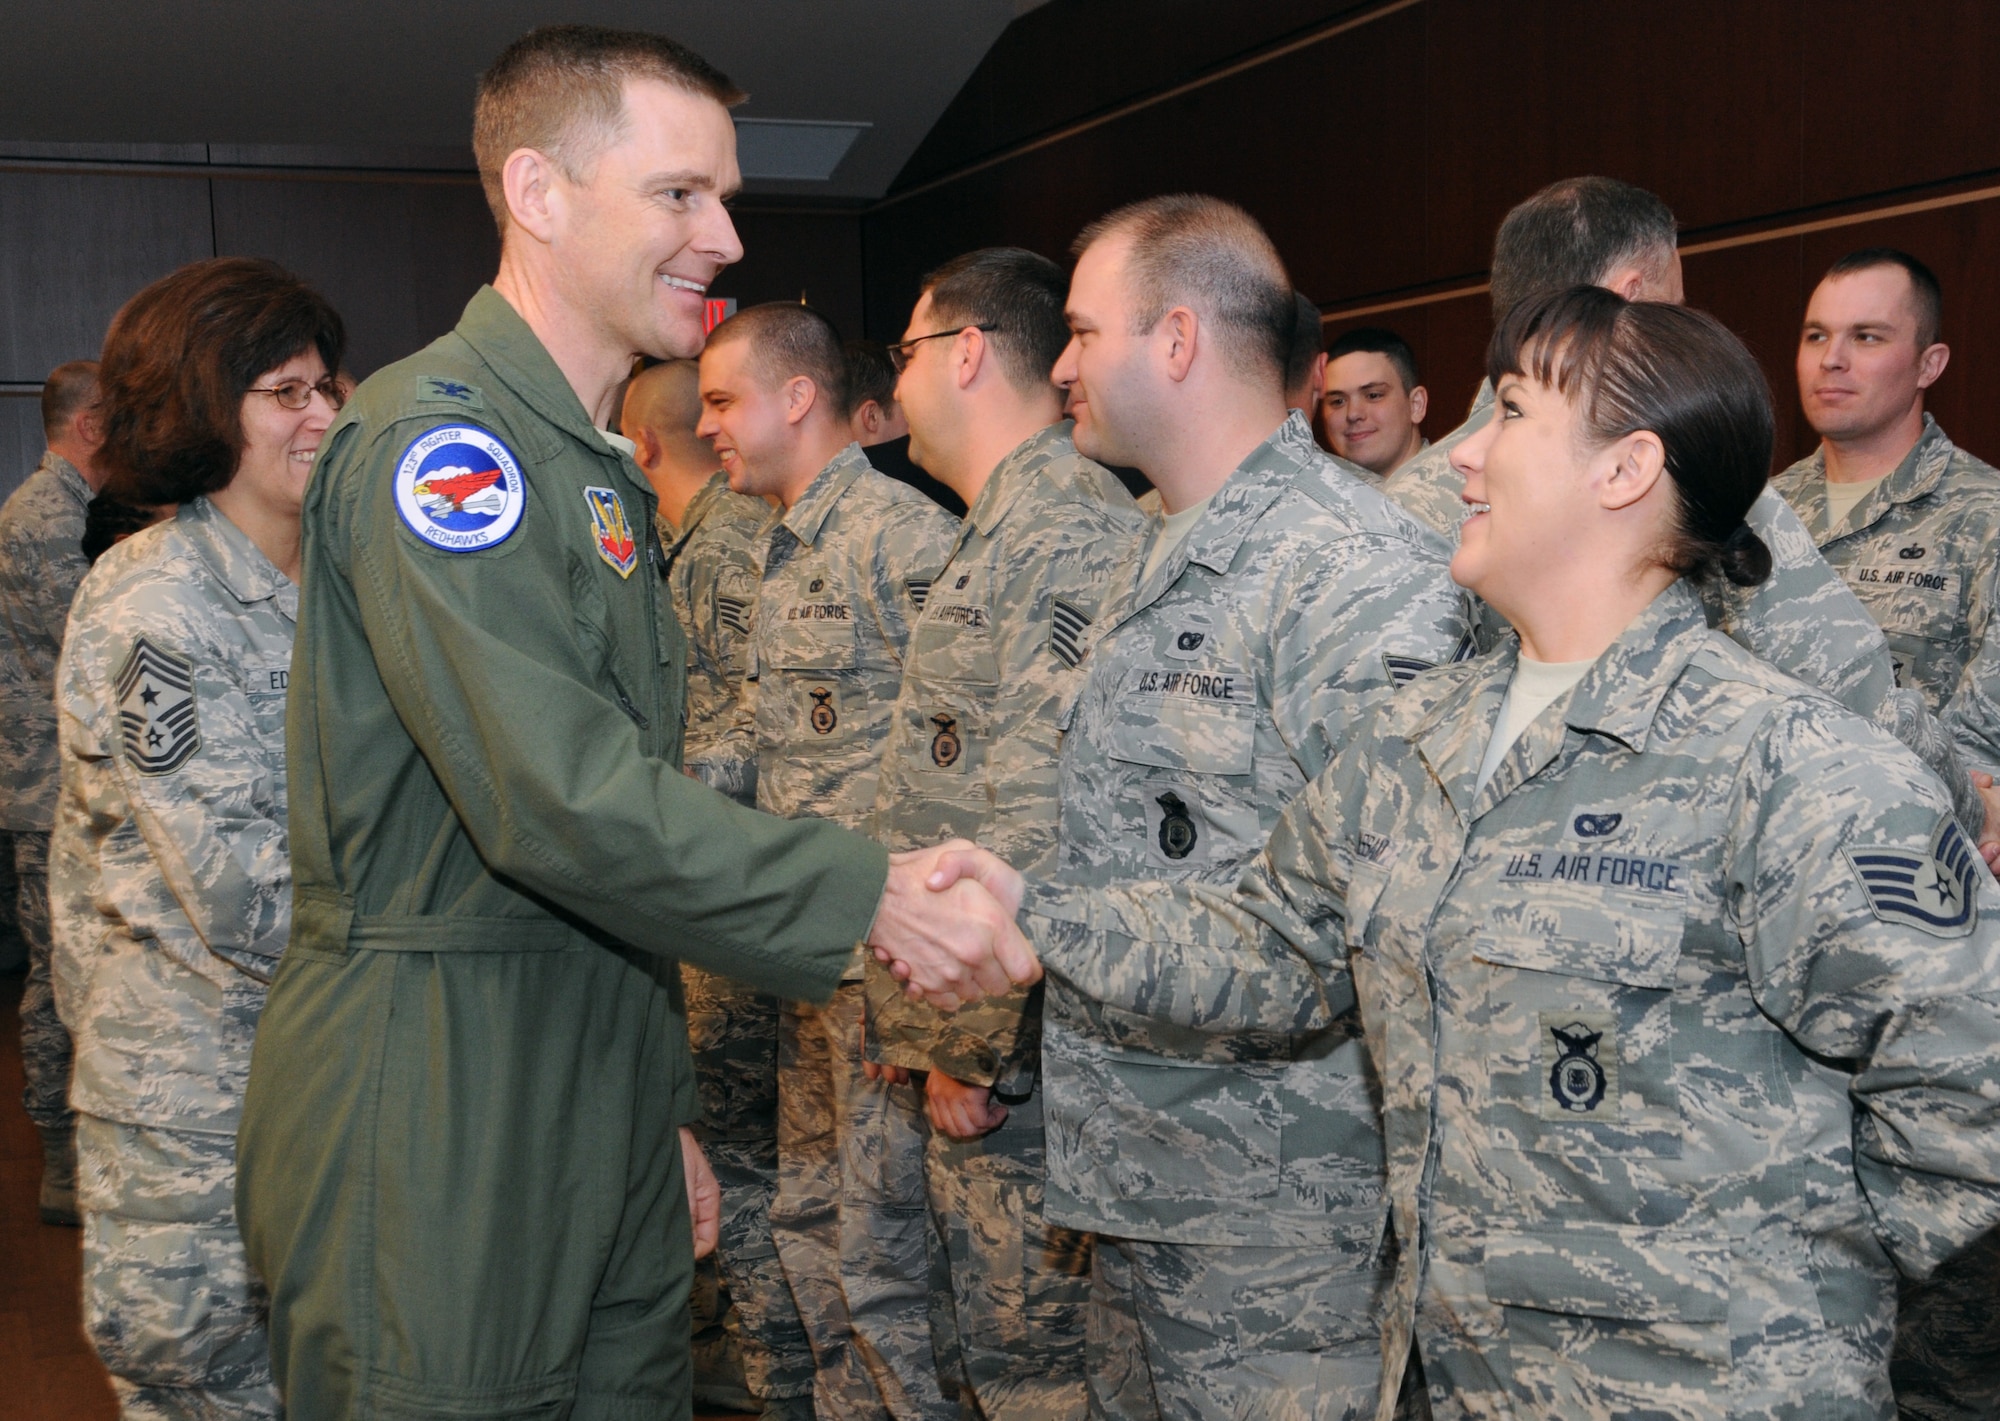 Oregon Air National Guard Col. Rick Wedan, 142nd Fighter Wing Commander shakes hands with Oregon Air National Guard Staff Sgt. Sara J. Wassam, 142nd Fighter Wing Security Forces Squadron during the mobilization ceremony for the 142nd Fighter Wing Security Forces Squadron at Camp Withycombe, Ore., Dec. 11, 2012. (U.S. Air Force photograph by Tech. Sgt. John Hughel, 142nd Fighter Wing Public Affairs/Released)